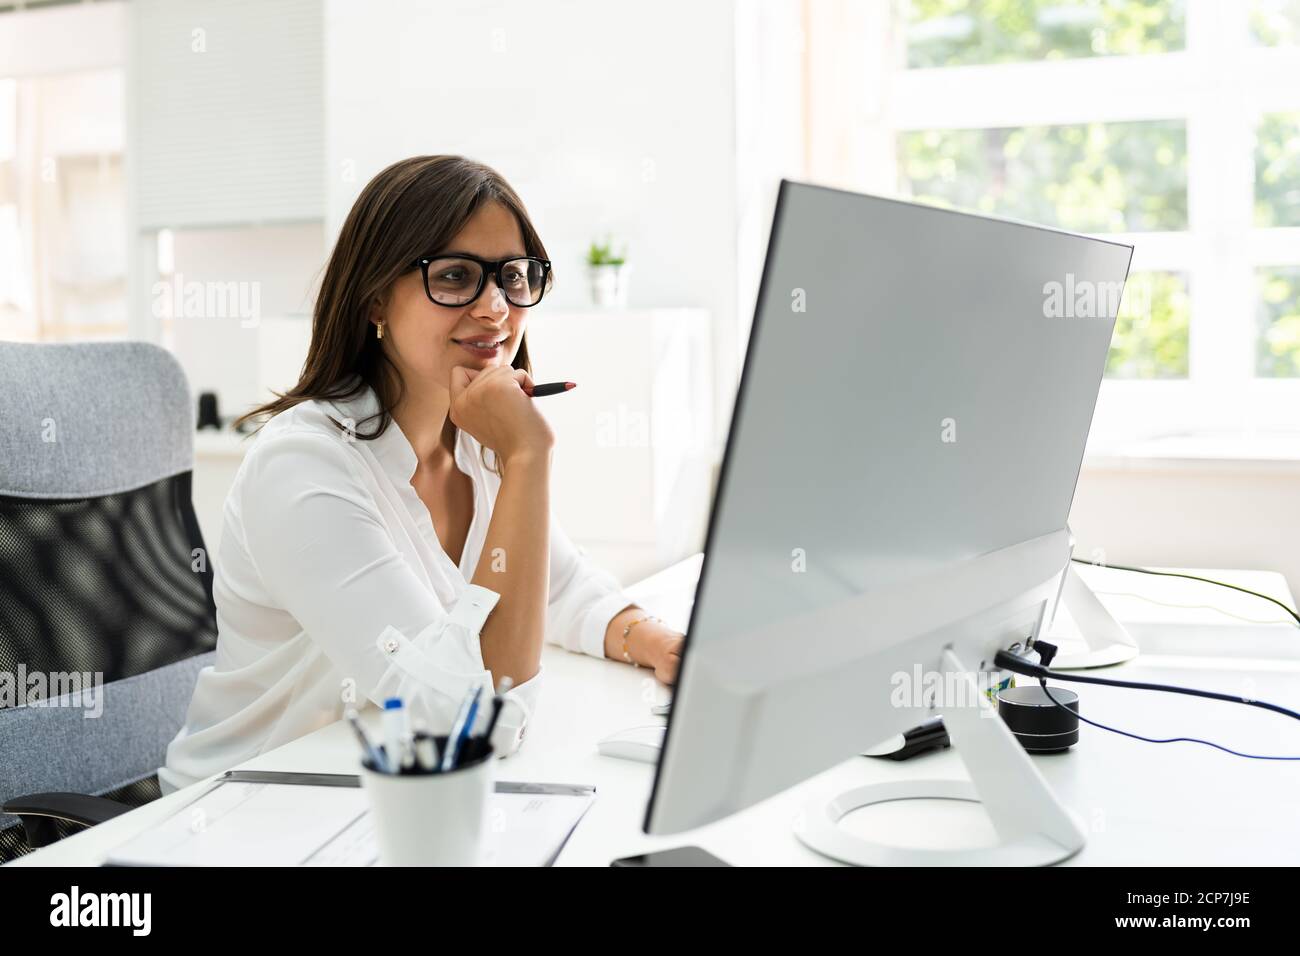 Business Executive Woman Working On Corporate Computer Stock Photo